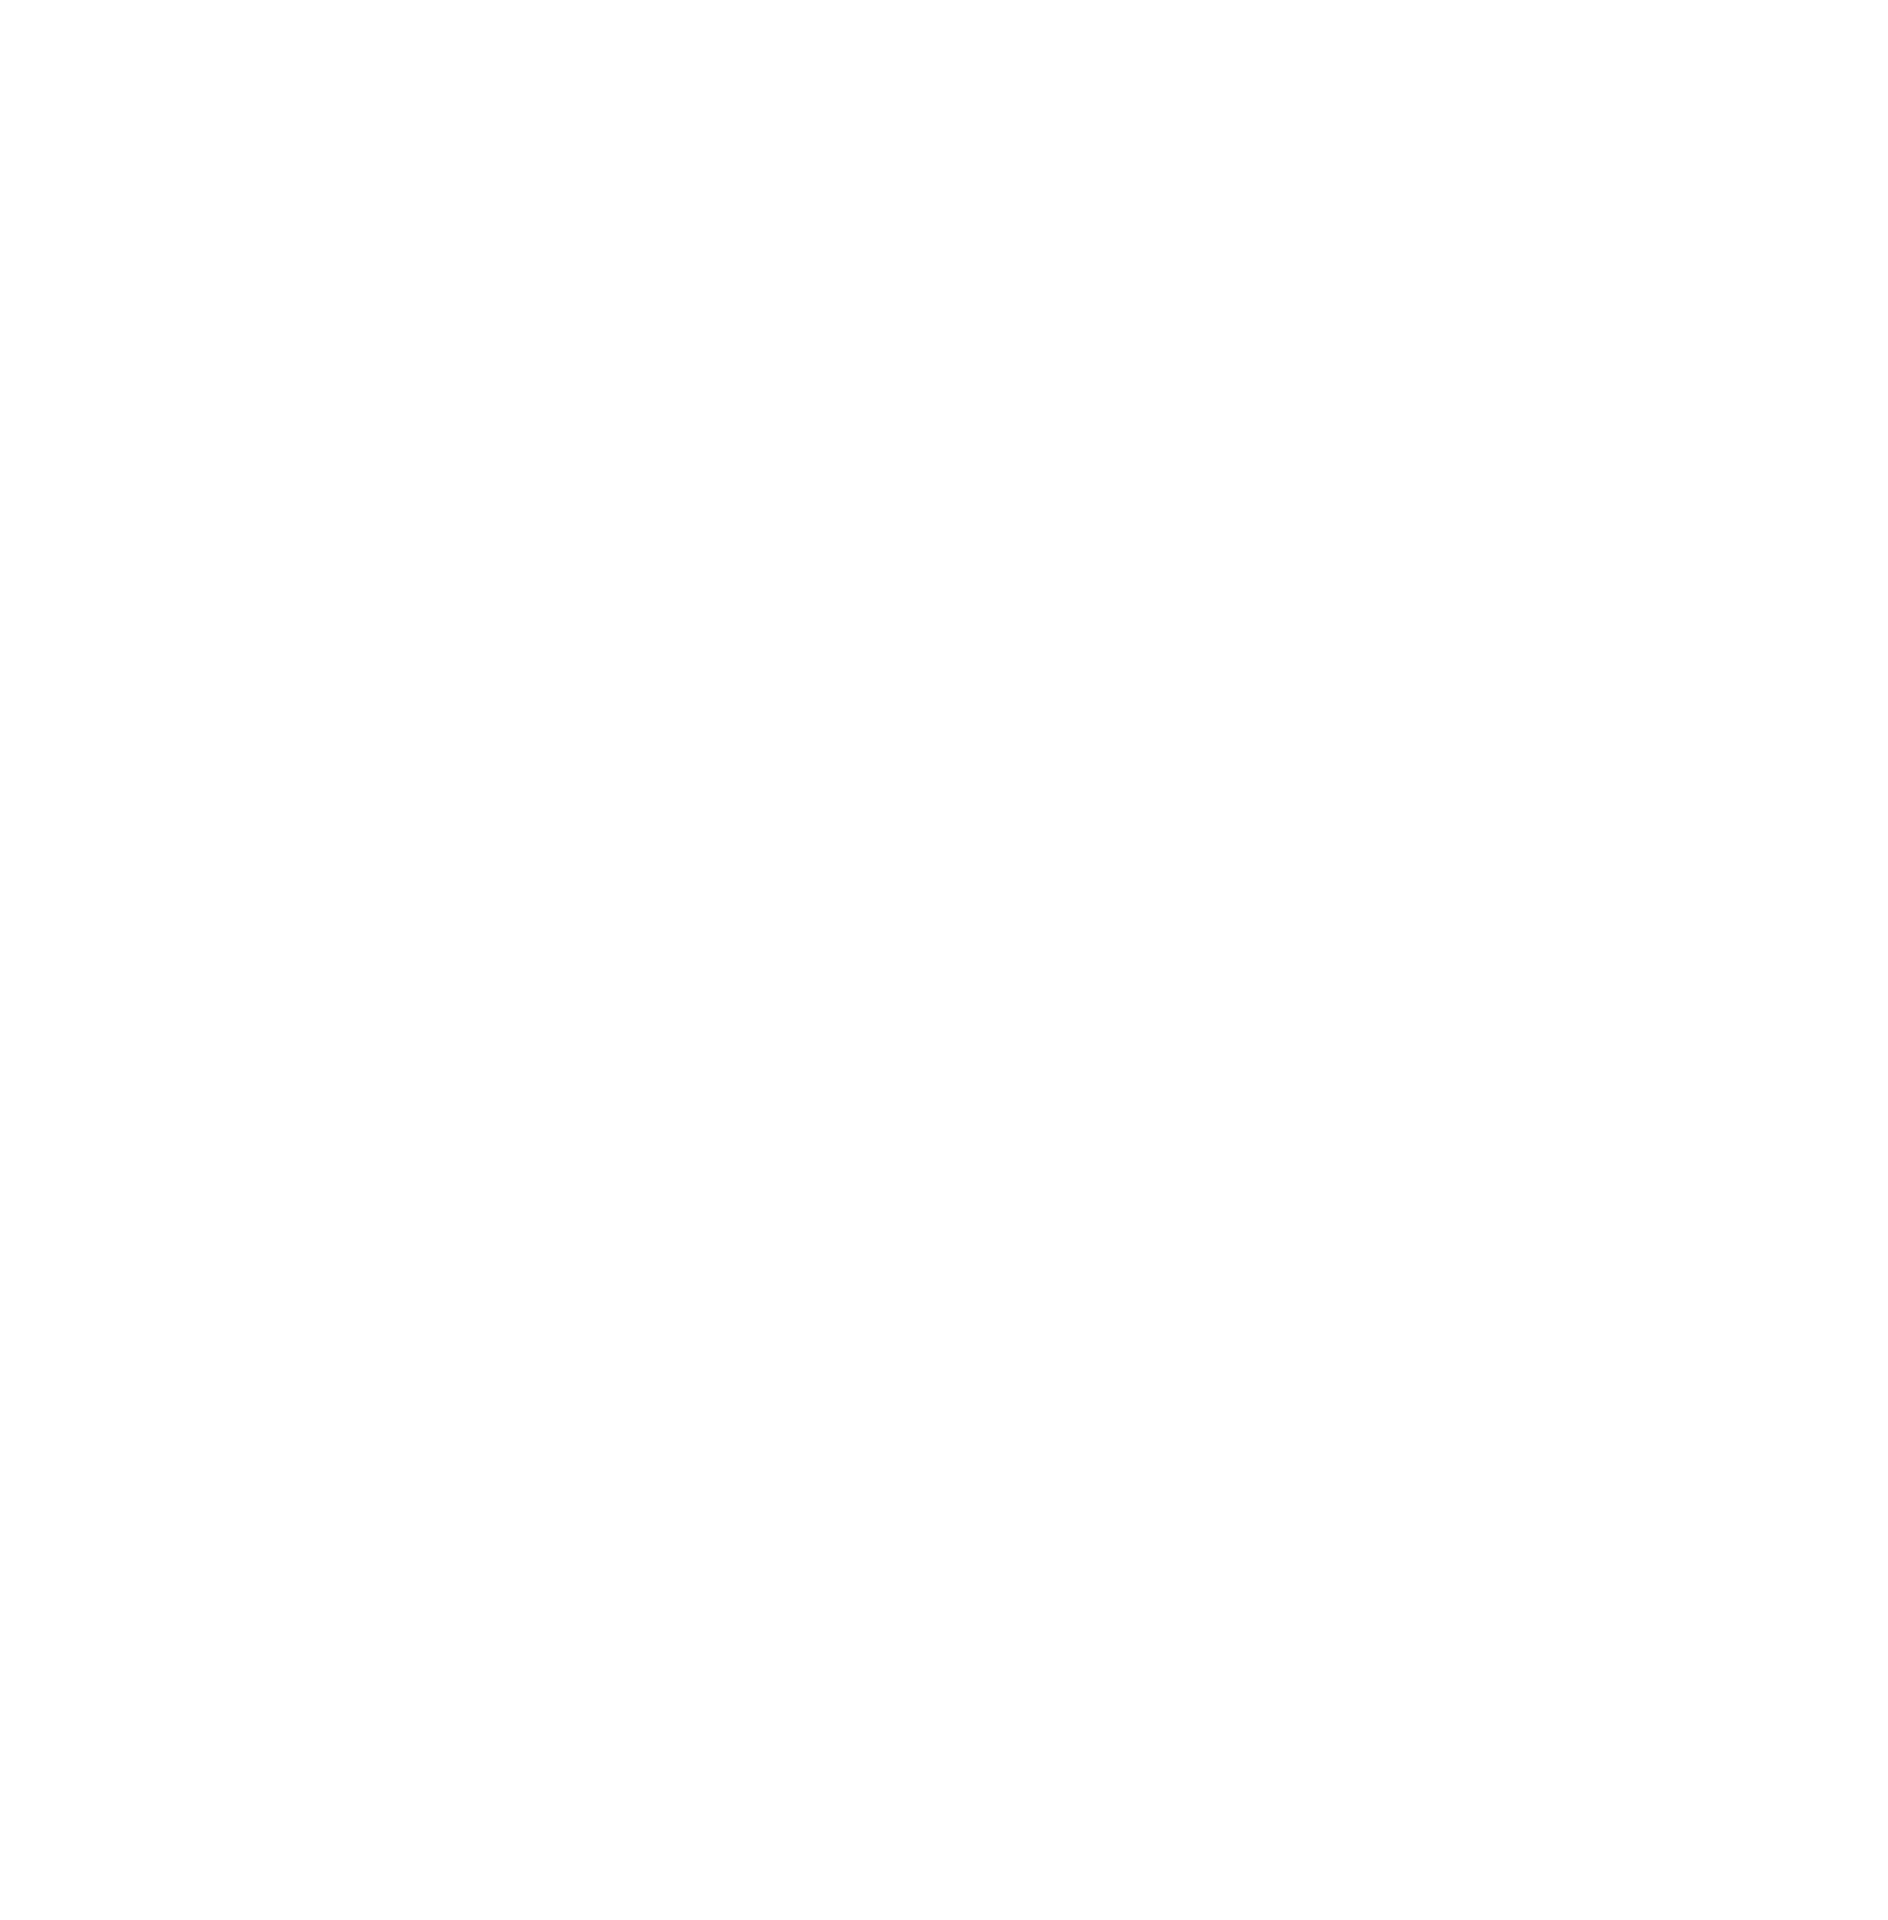 A quadrilateral from a line without a filler